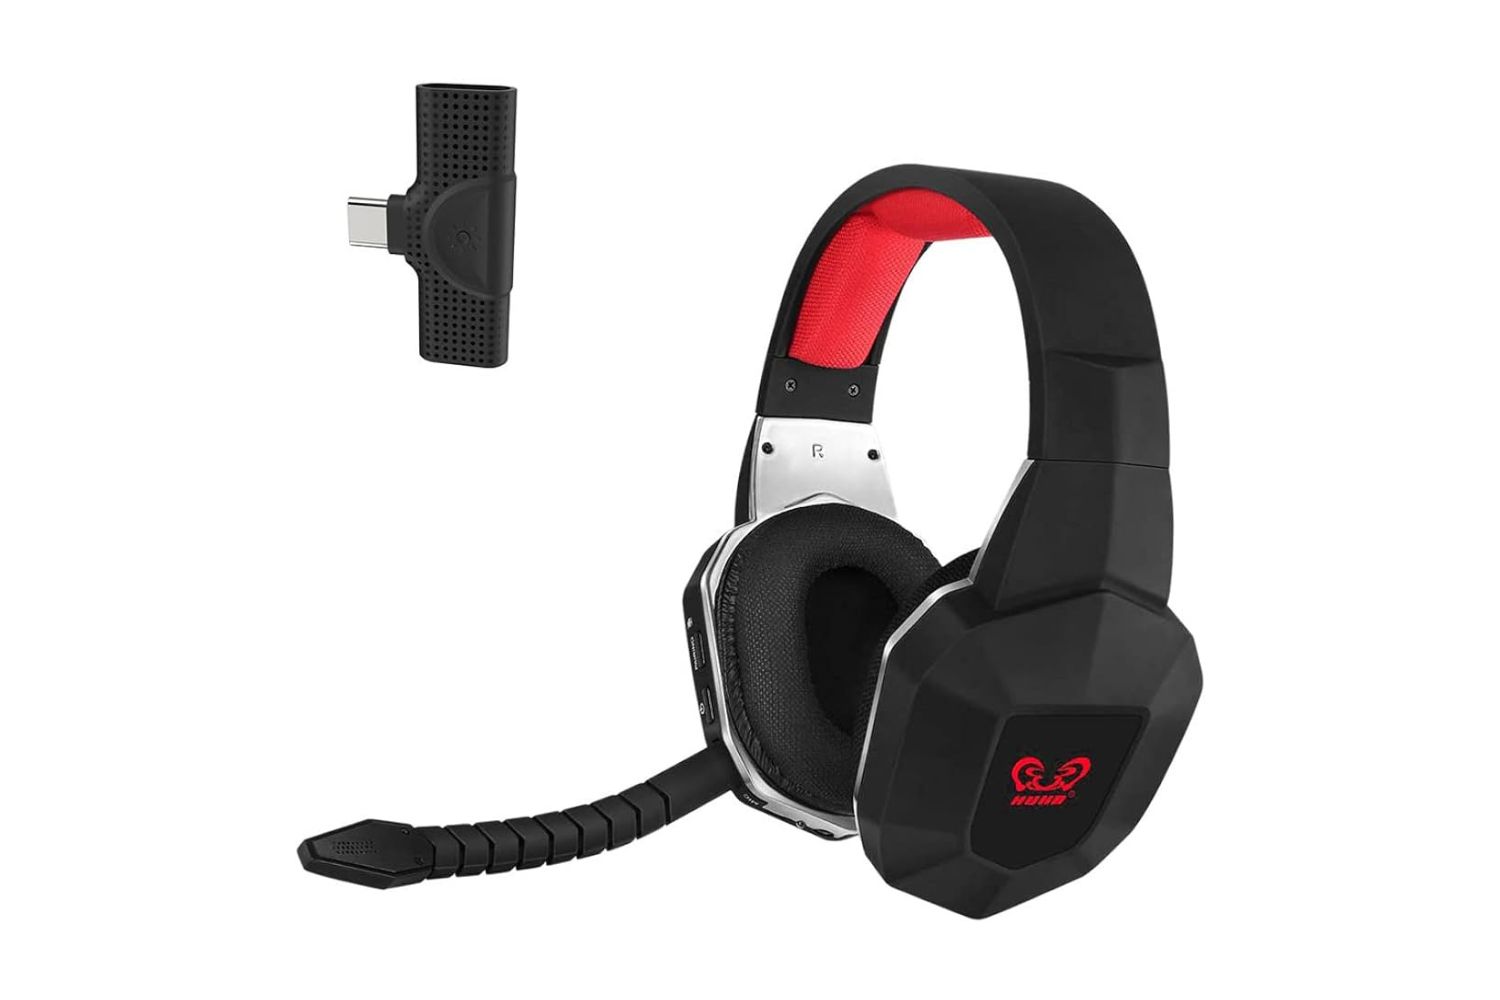 How To Hook Up Hamswan Stereo Gaming Headset For The Xbox One (Guide)